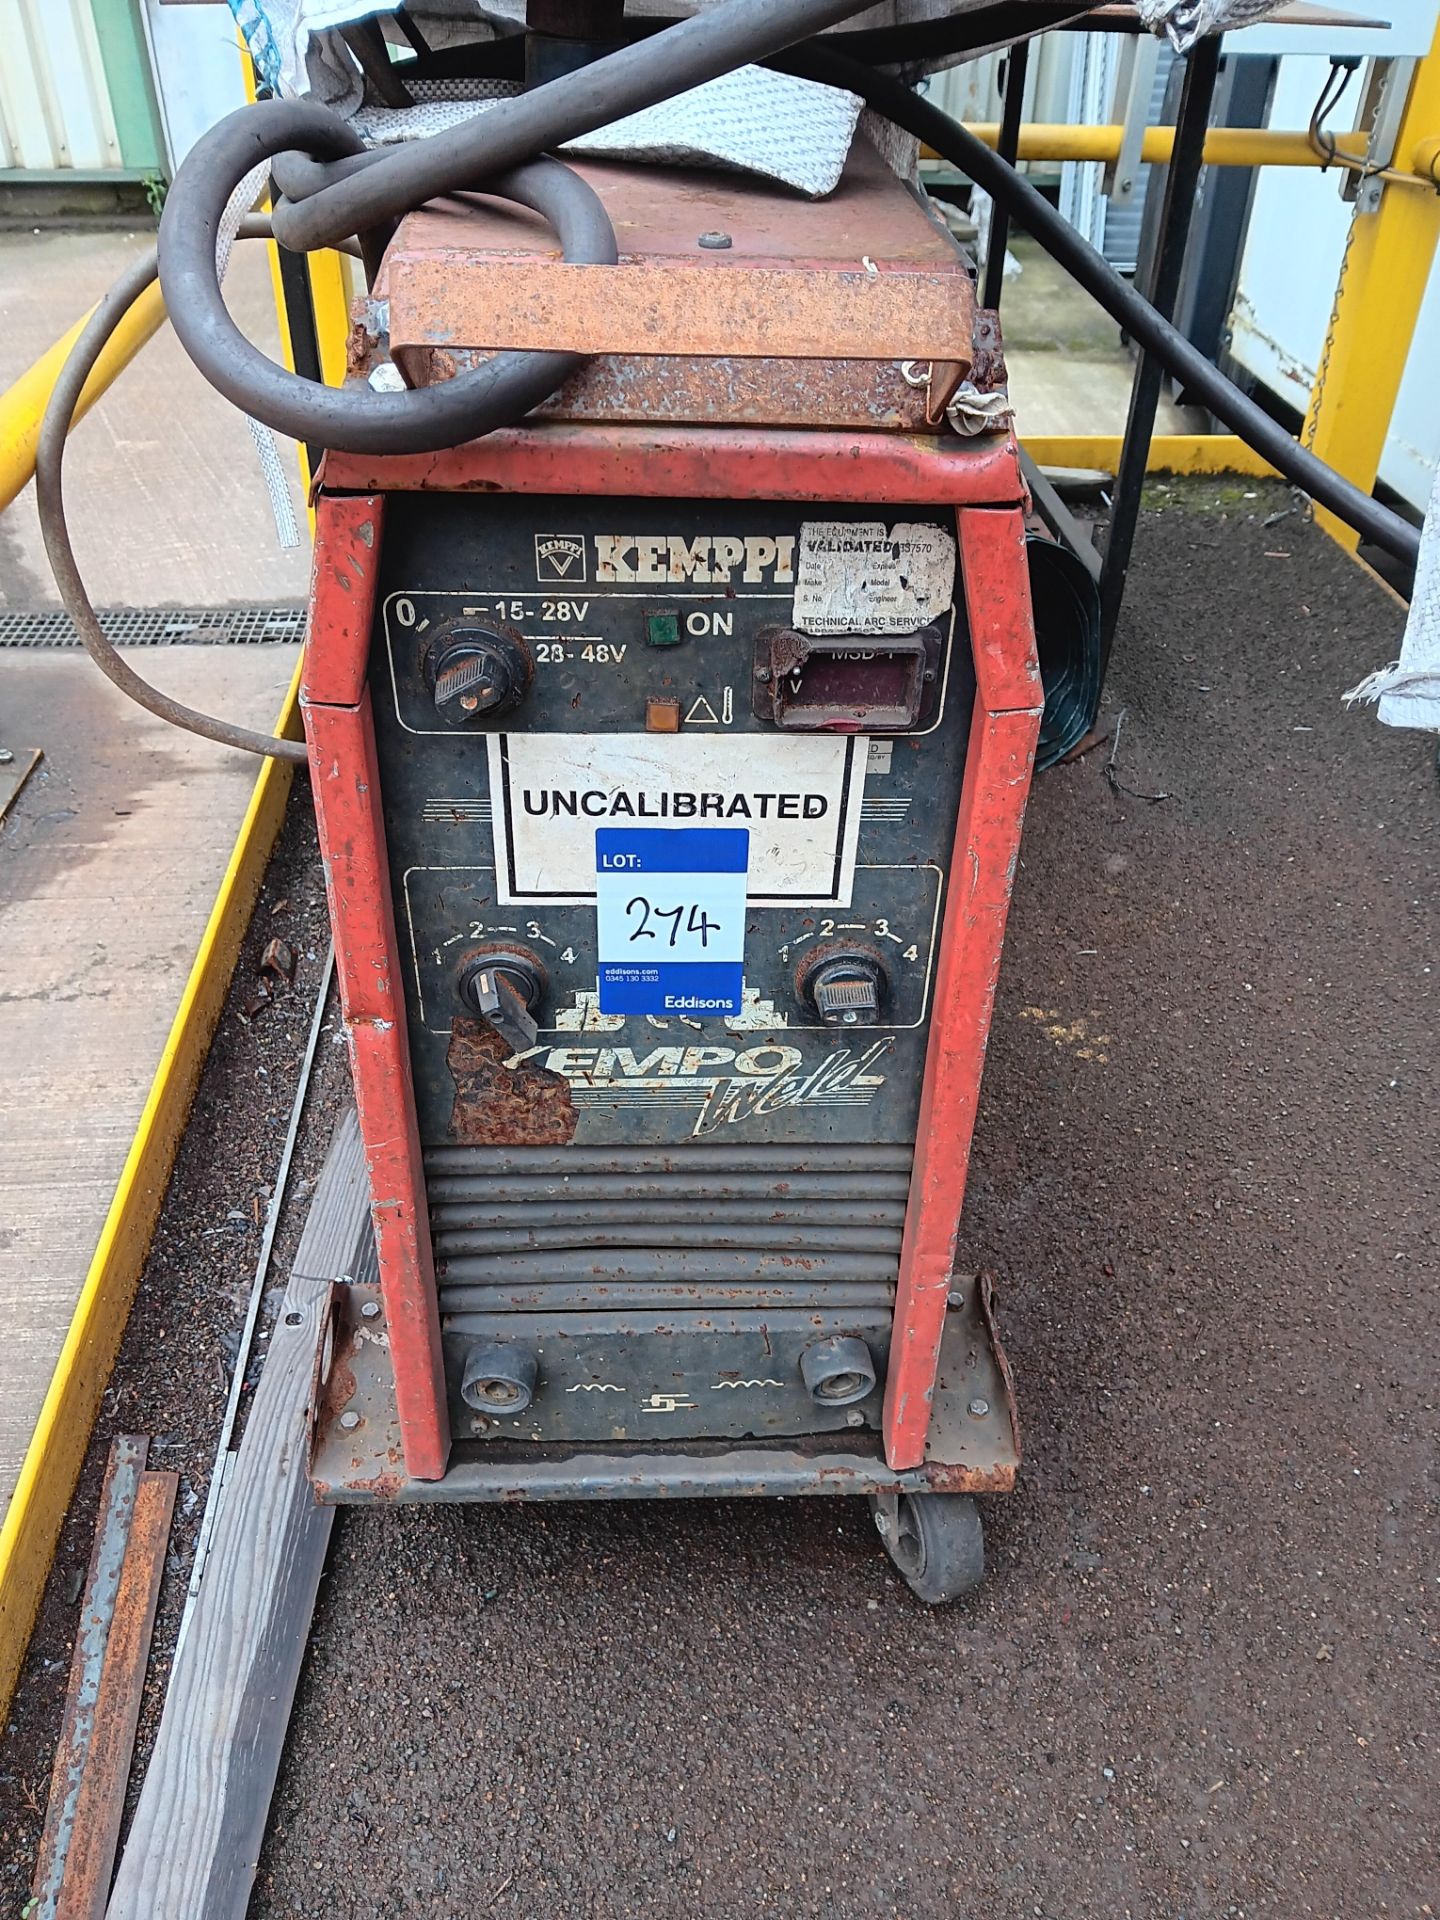 Decommissioned kempo weld welder